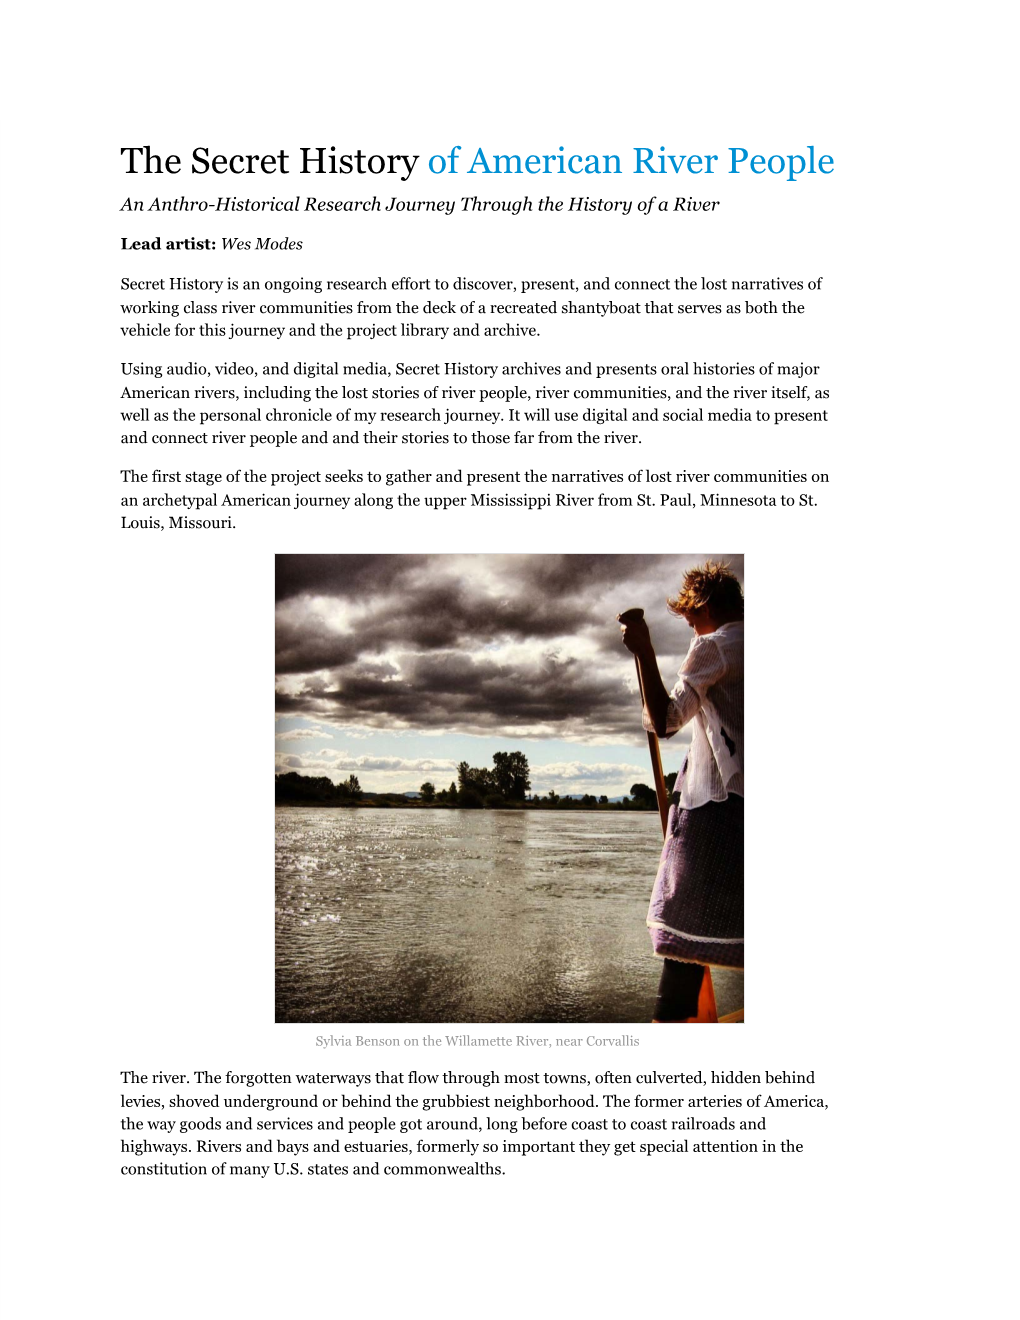 The Secret History of American River People an Anthro-Historical Research Journey Through the History of a River